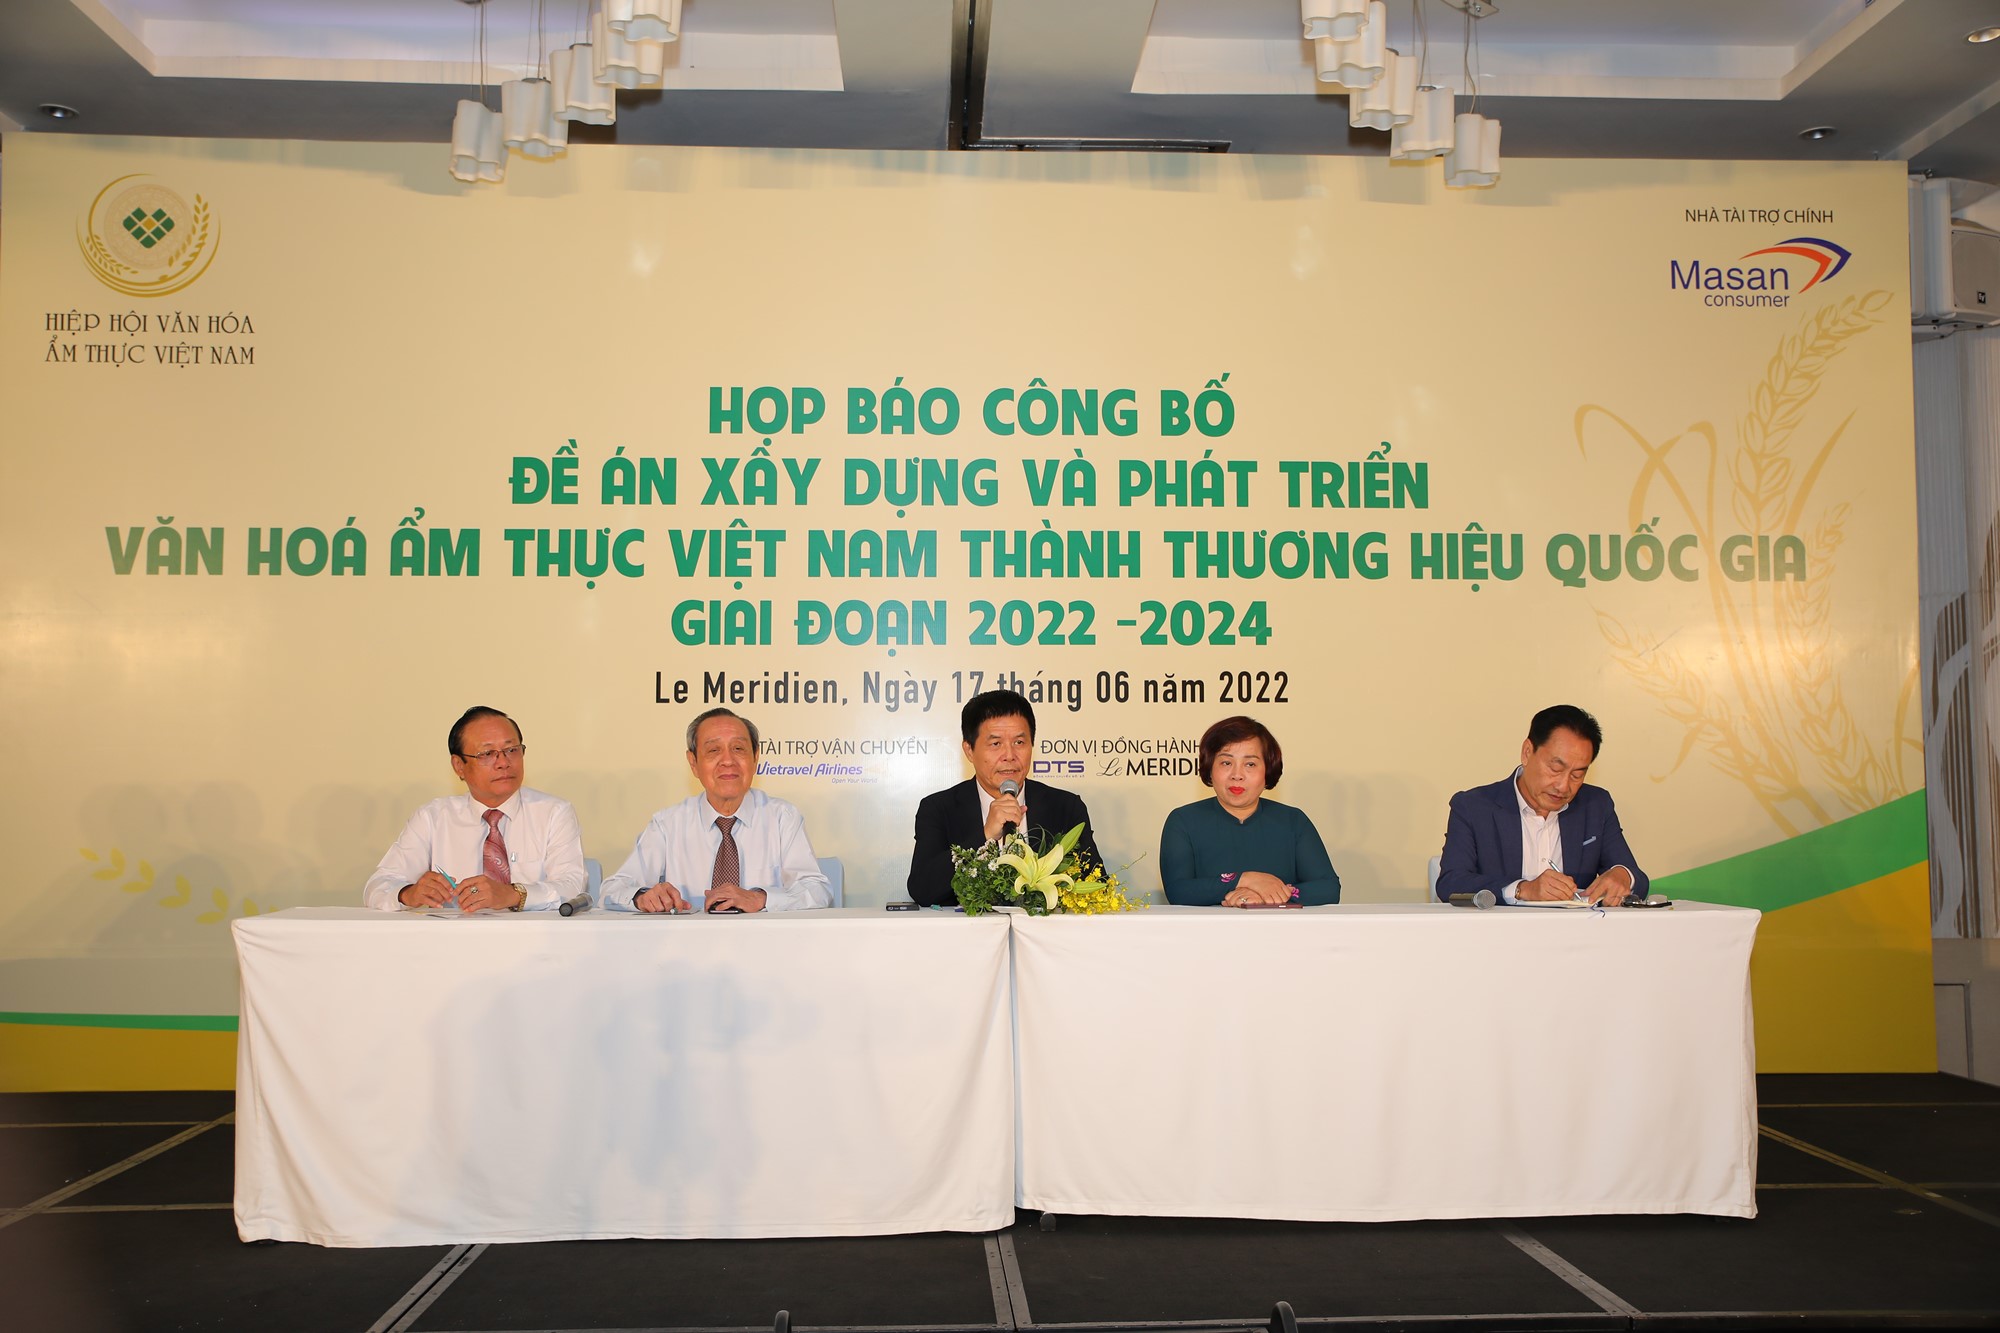 Press conference to announce the project of Building and developing Vietnamese culinary culture on the afternoon of June 17 in Ho Chi Minh City.